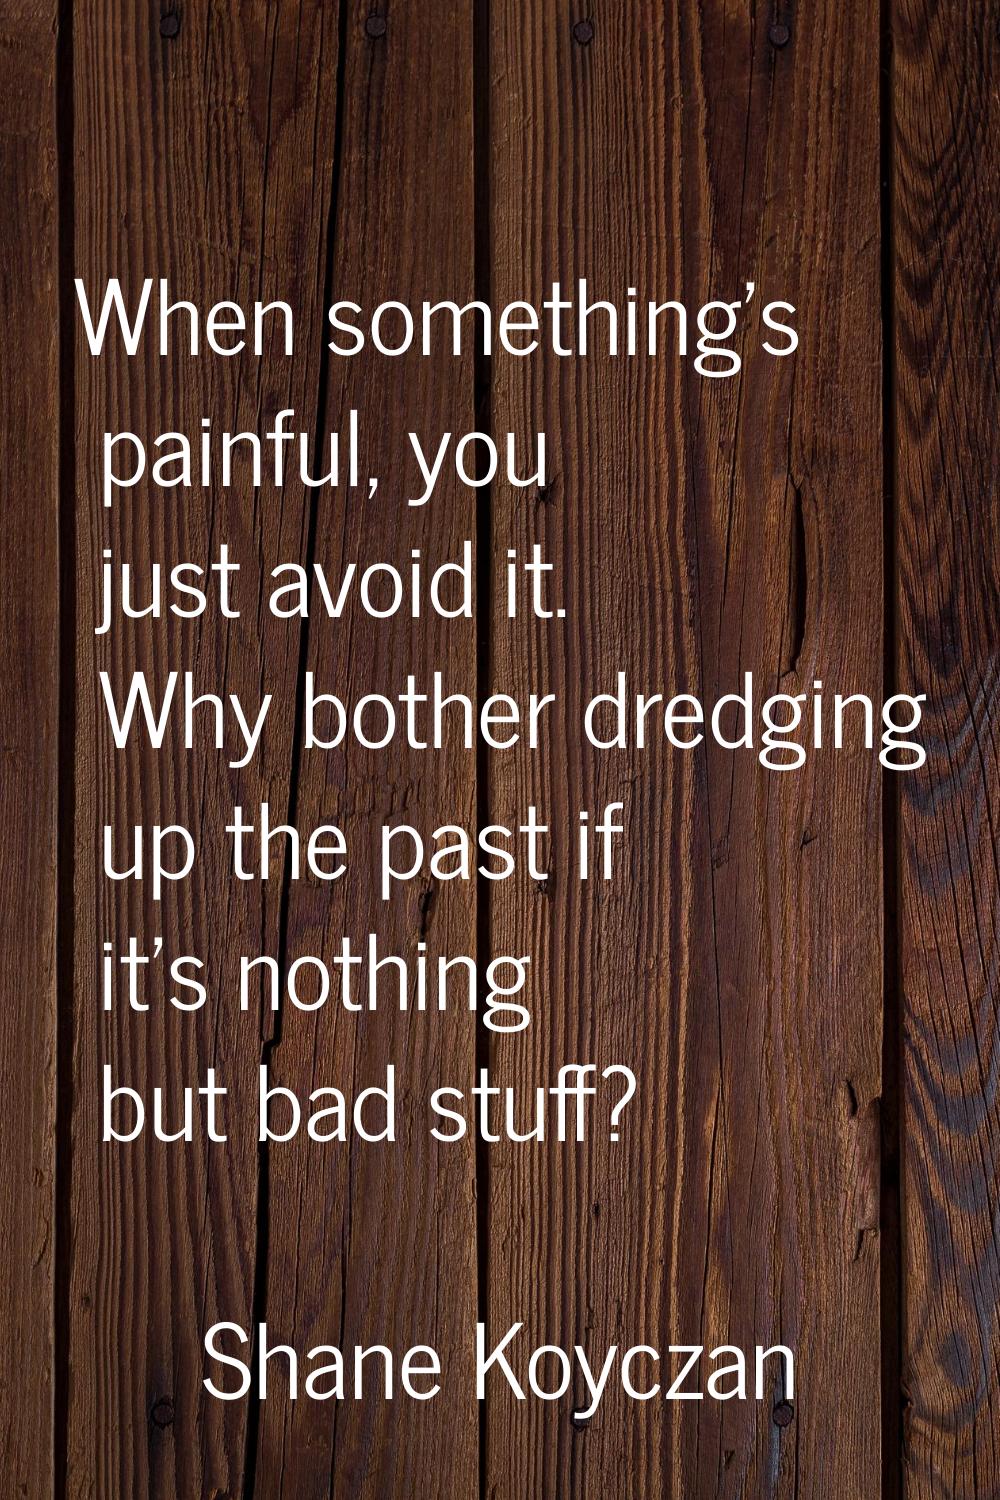 When something's painful, you just avoid it. Why bother dredging up the past if it's nothing but ba